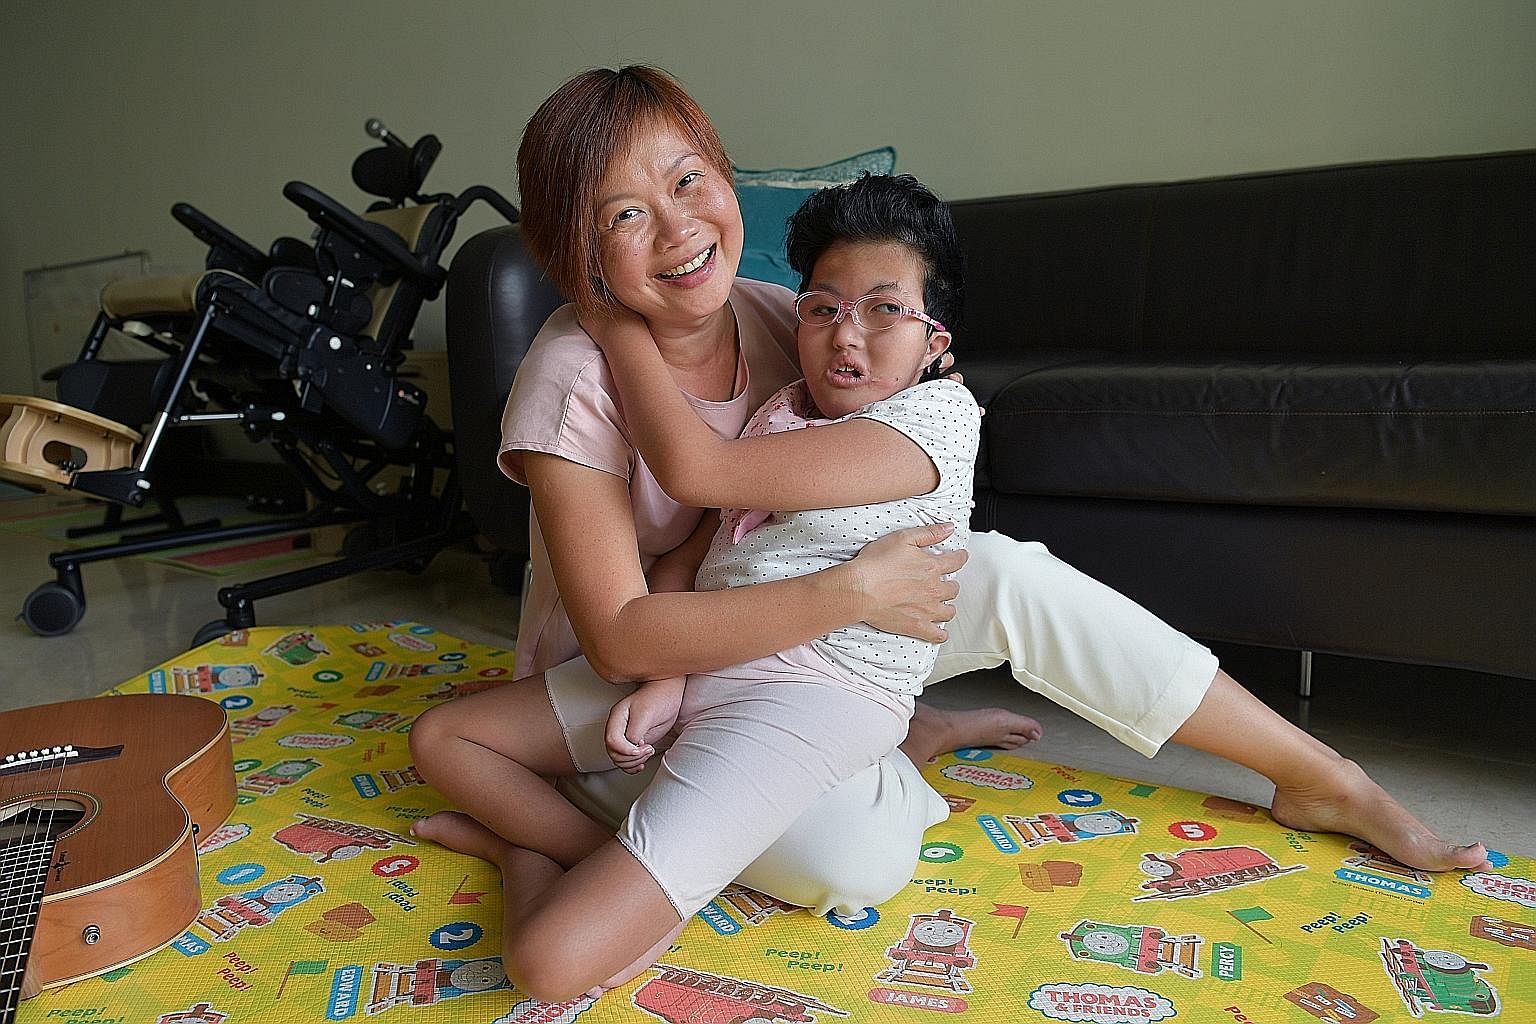 Ms Tham Yin May and her daughter Vera, who was born with a rare genetic disorder that resulted in her having a lateral cleft palate and defects of the brain, heart, stomach, airway, spine, ears, fingers and feet. Vera cannot talk, walk or swallow, an